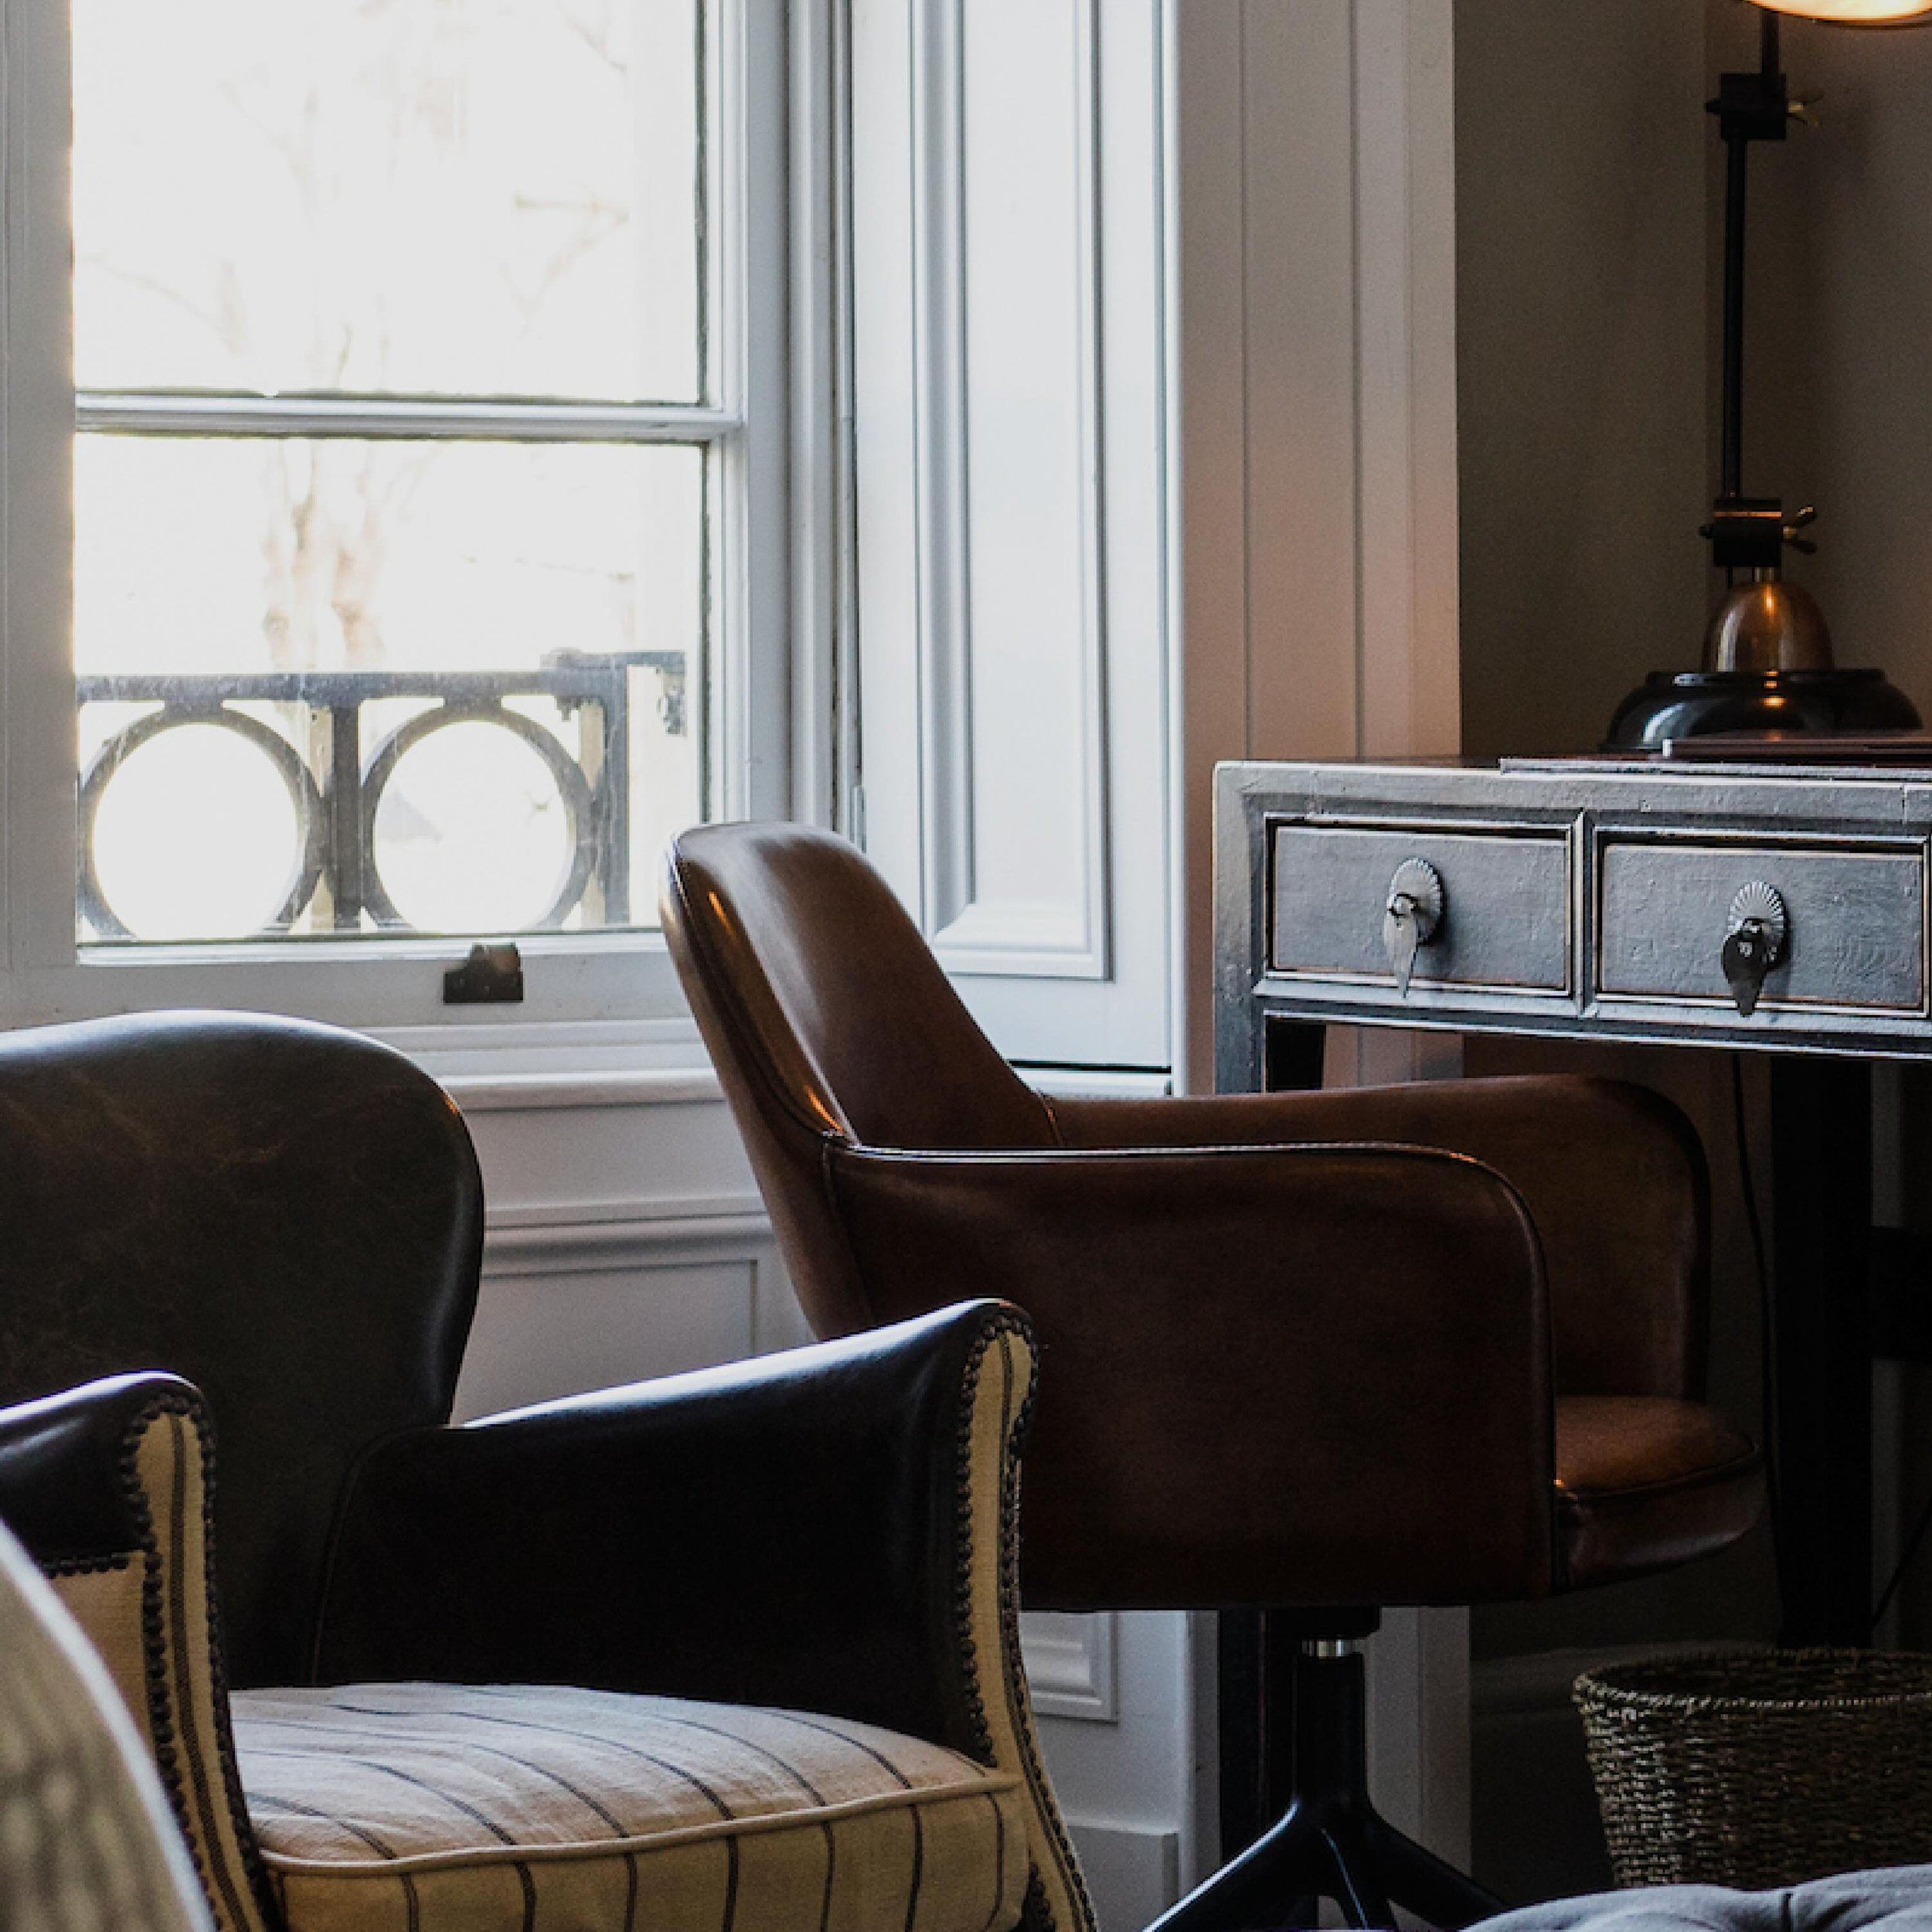 Welcome to Regency House, Belfast&rsquo;s first and only Hospitality House, for when luxury isn&rsquo;t enough.

Take a look at our new website, and book with us today. 

#RegencyHouse #BelfastHospitalityHouse